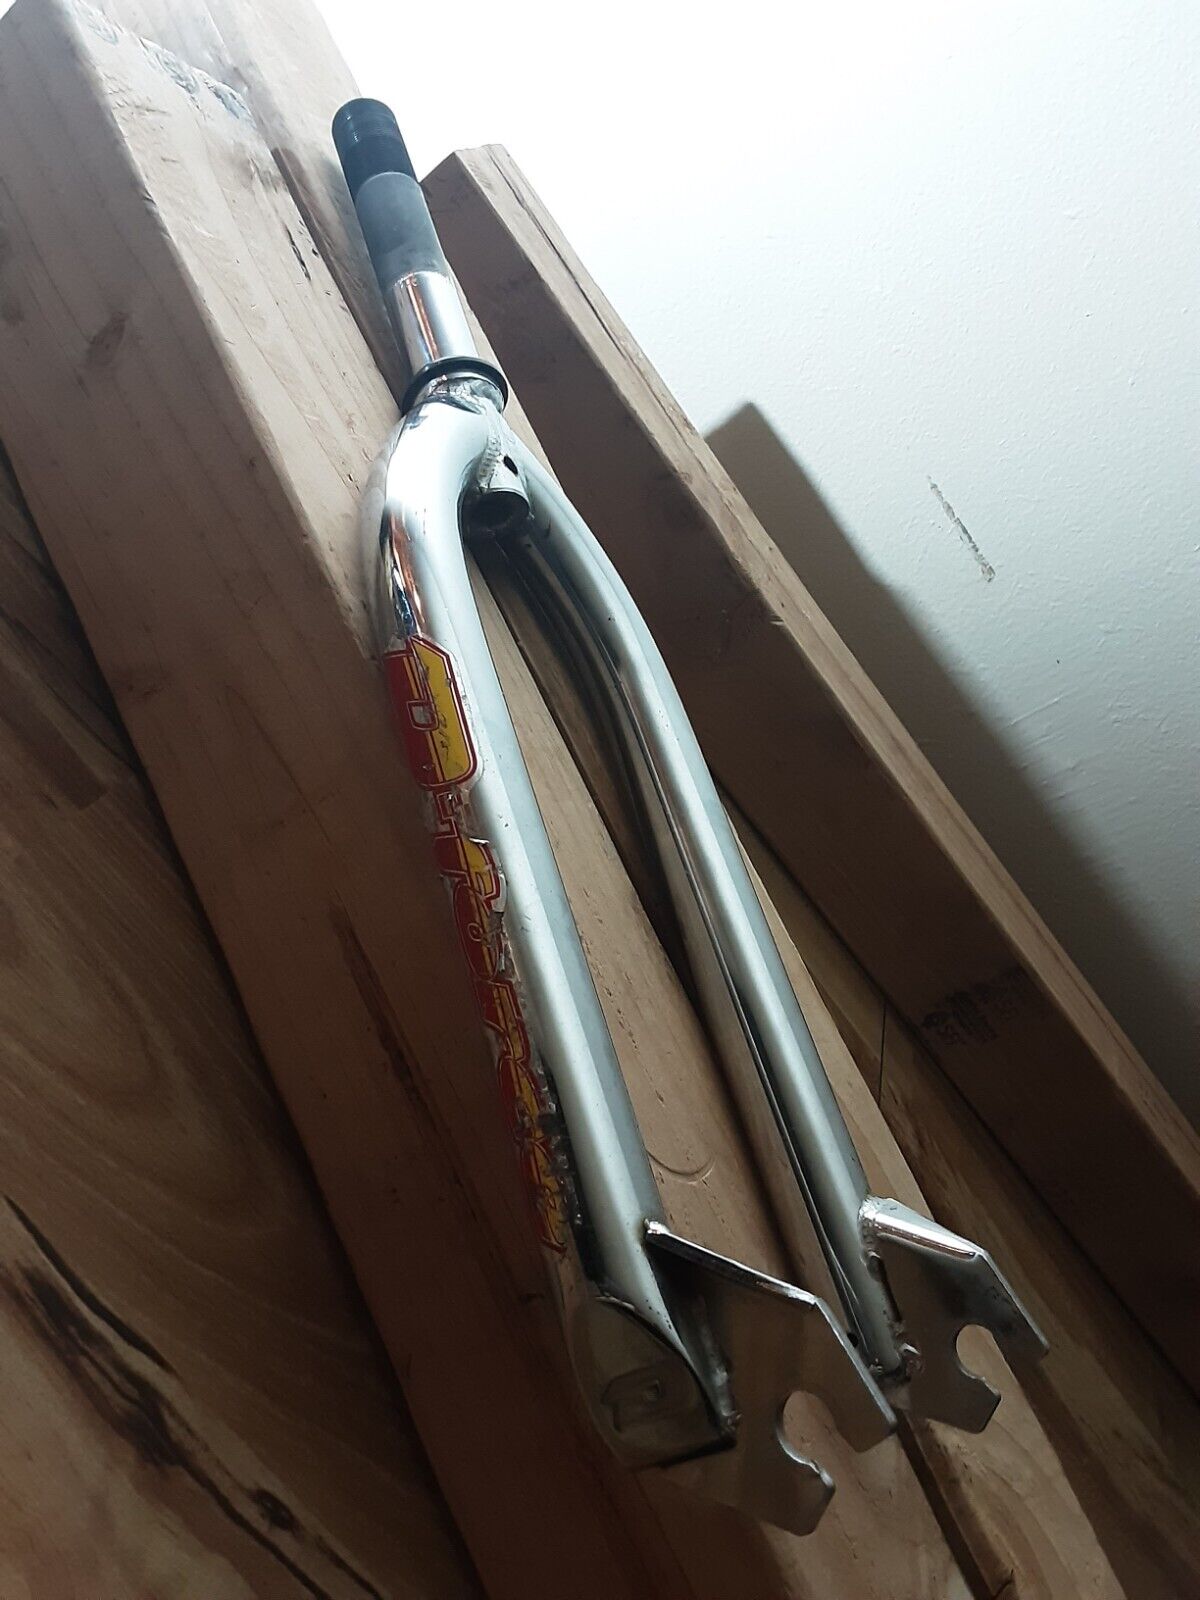 GT DYNO fork, threaded chrome. Stamped 97.